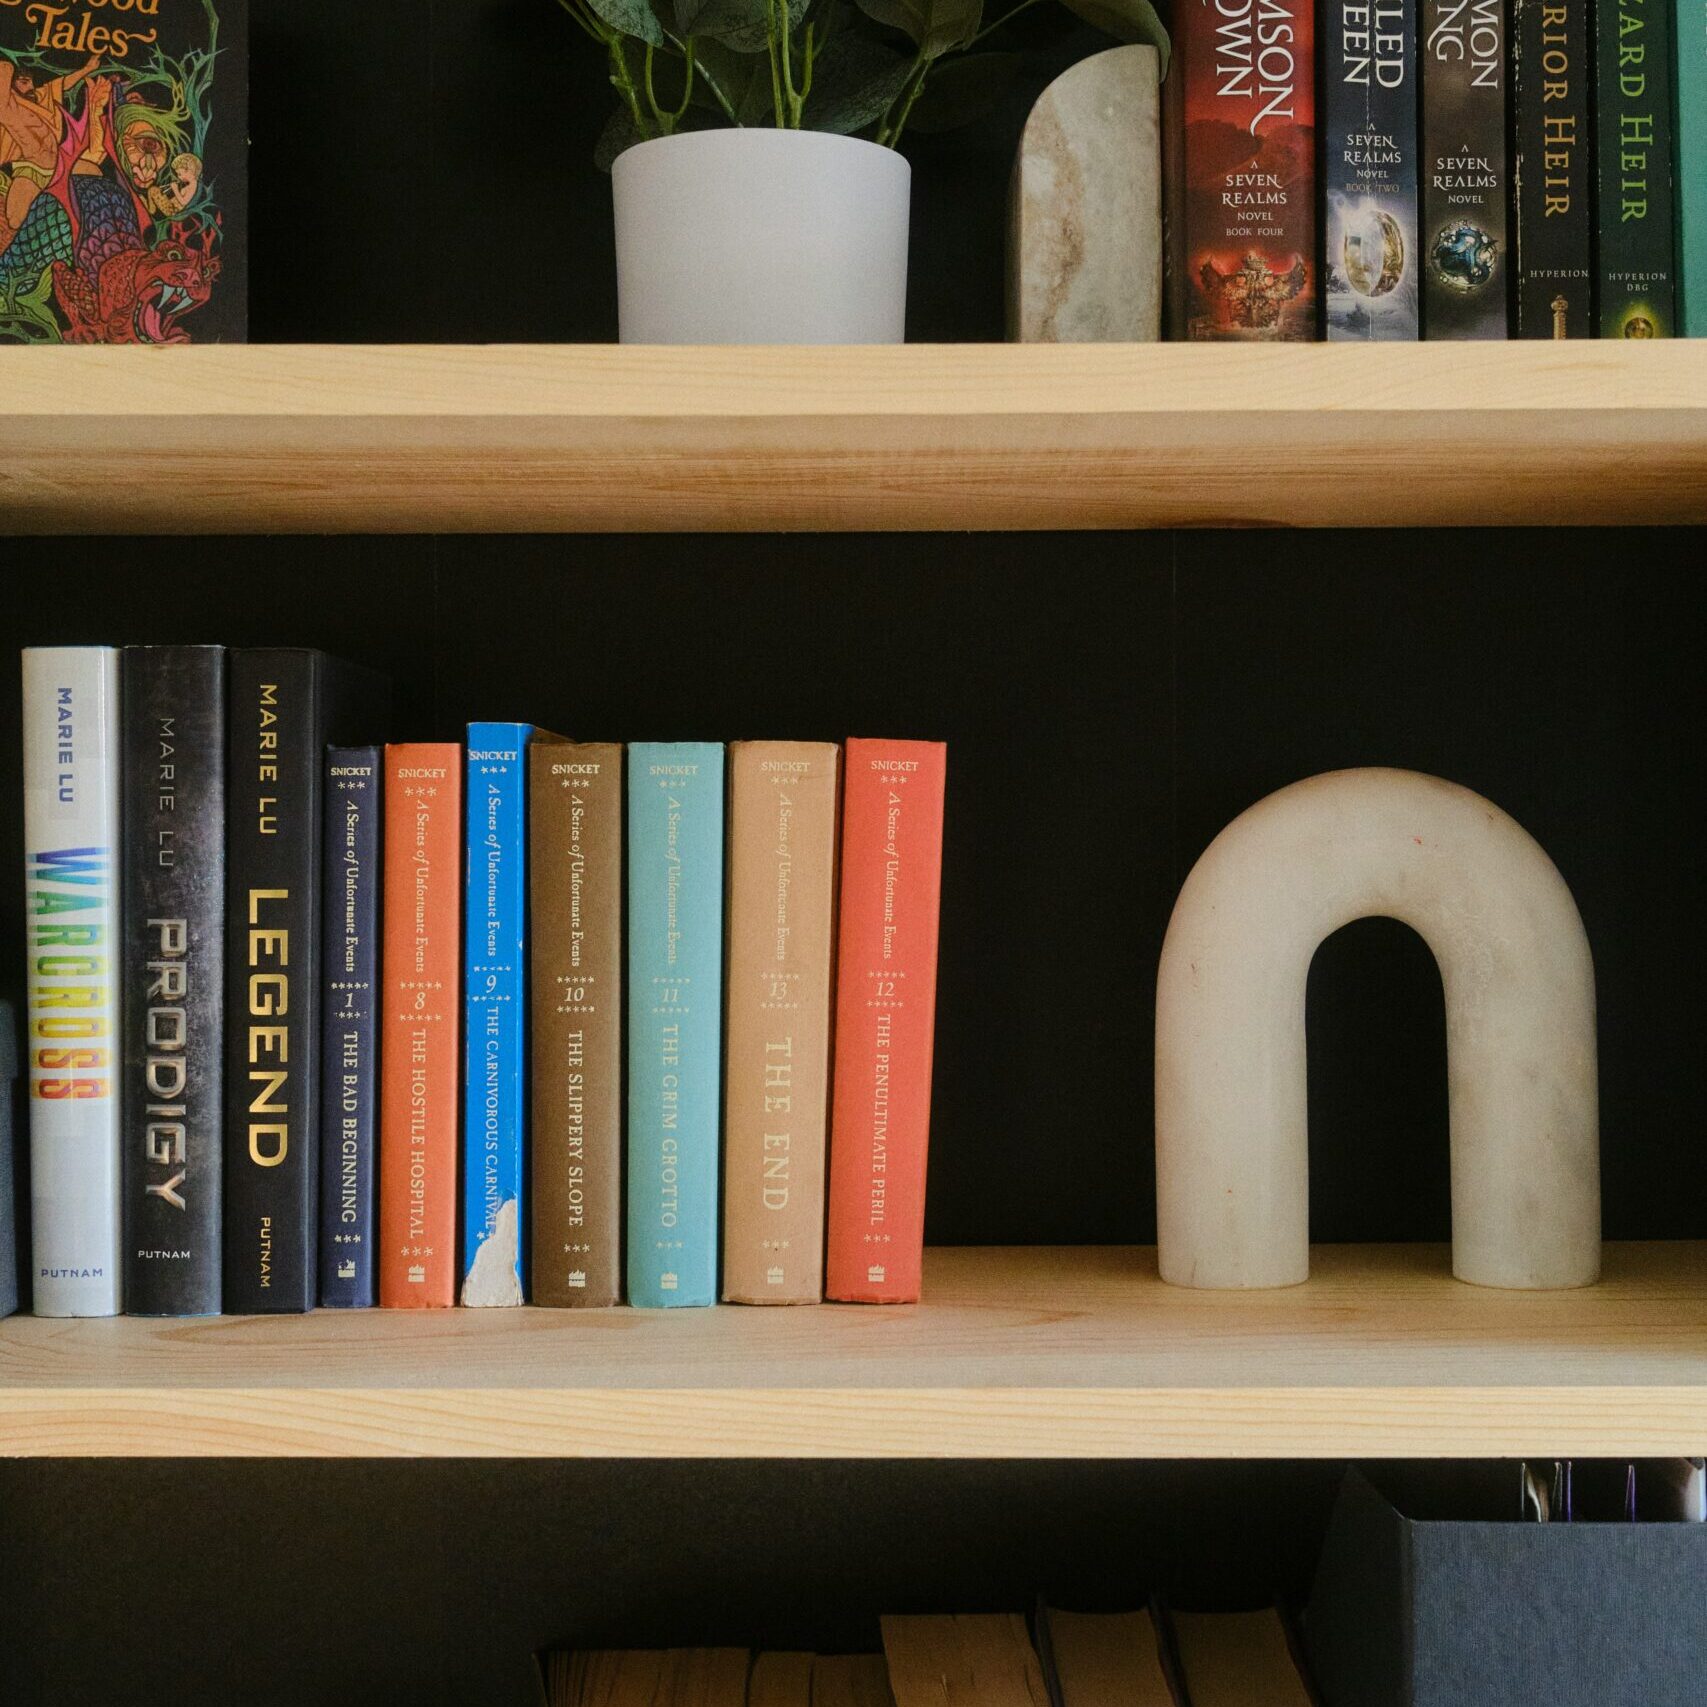 Shelf Styling with Top Shelf UK learn how to style a shelf guide and advice from experts